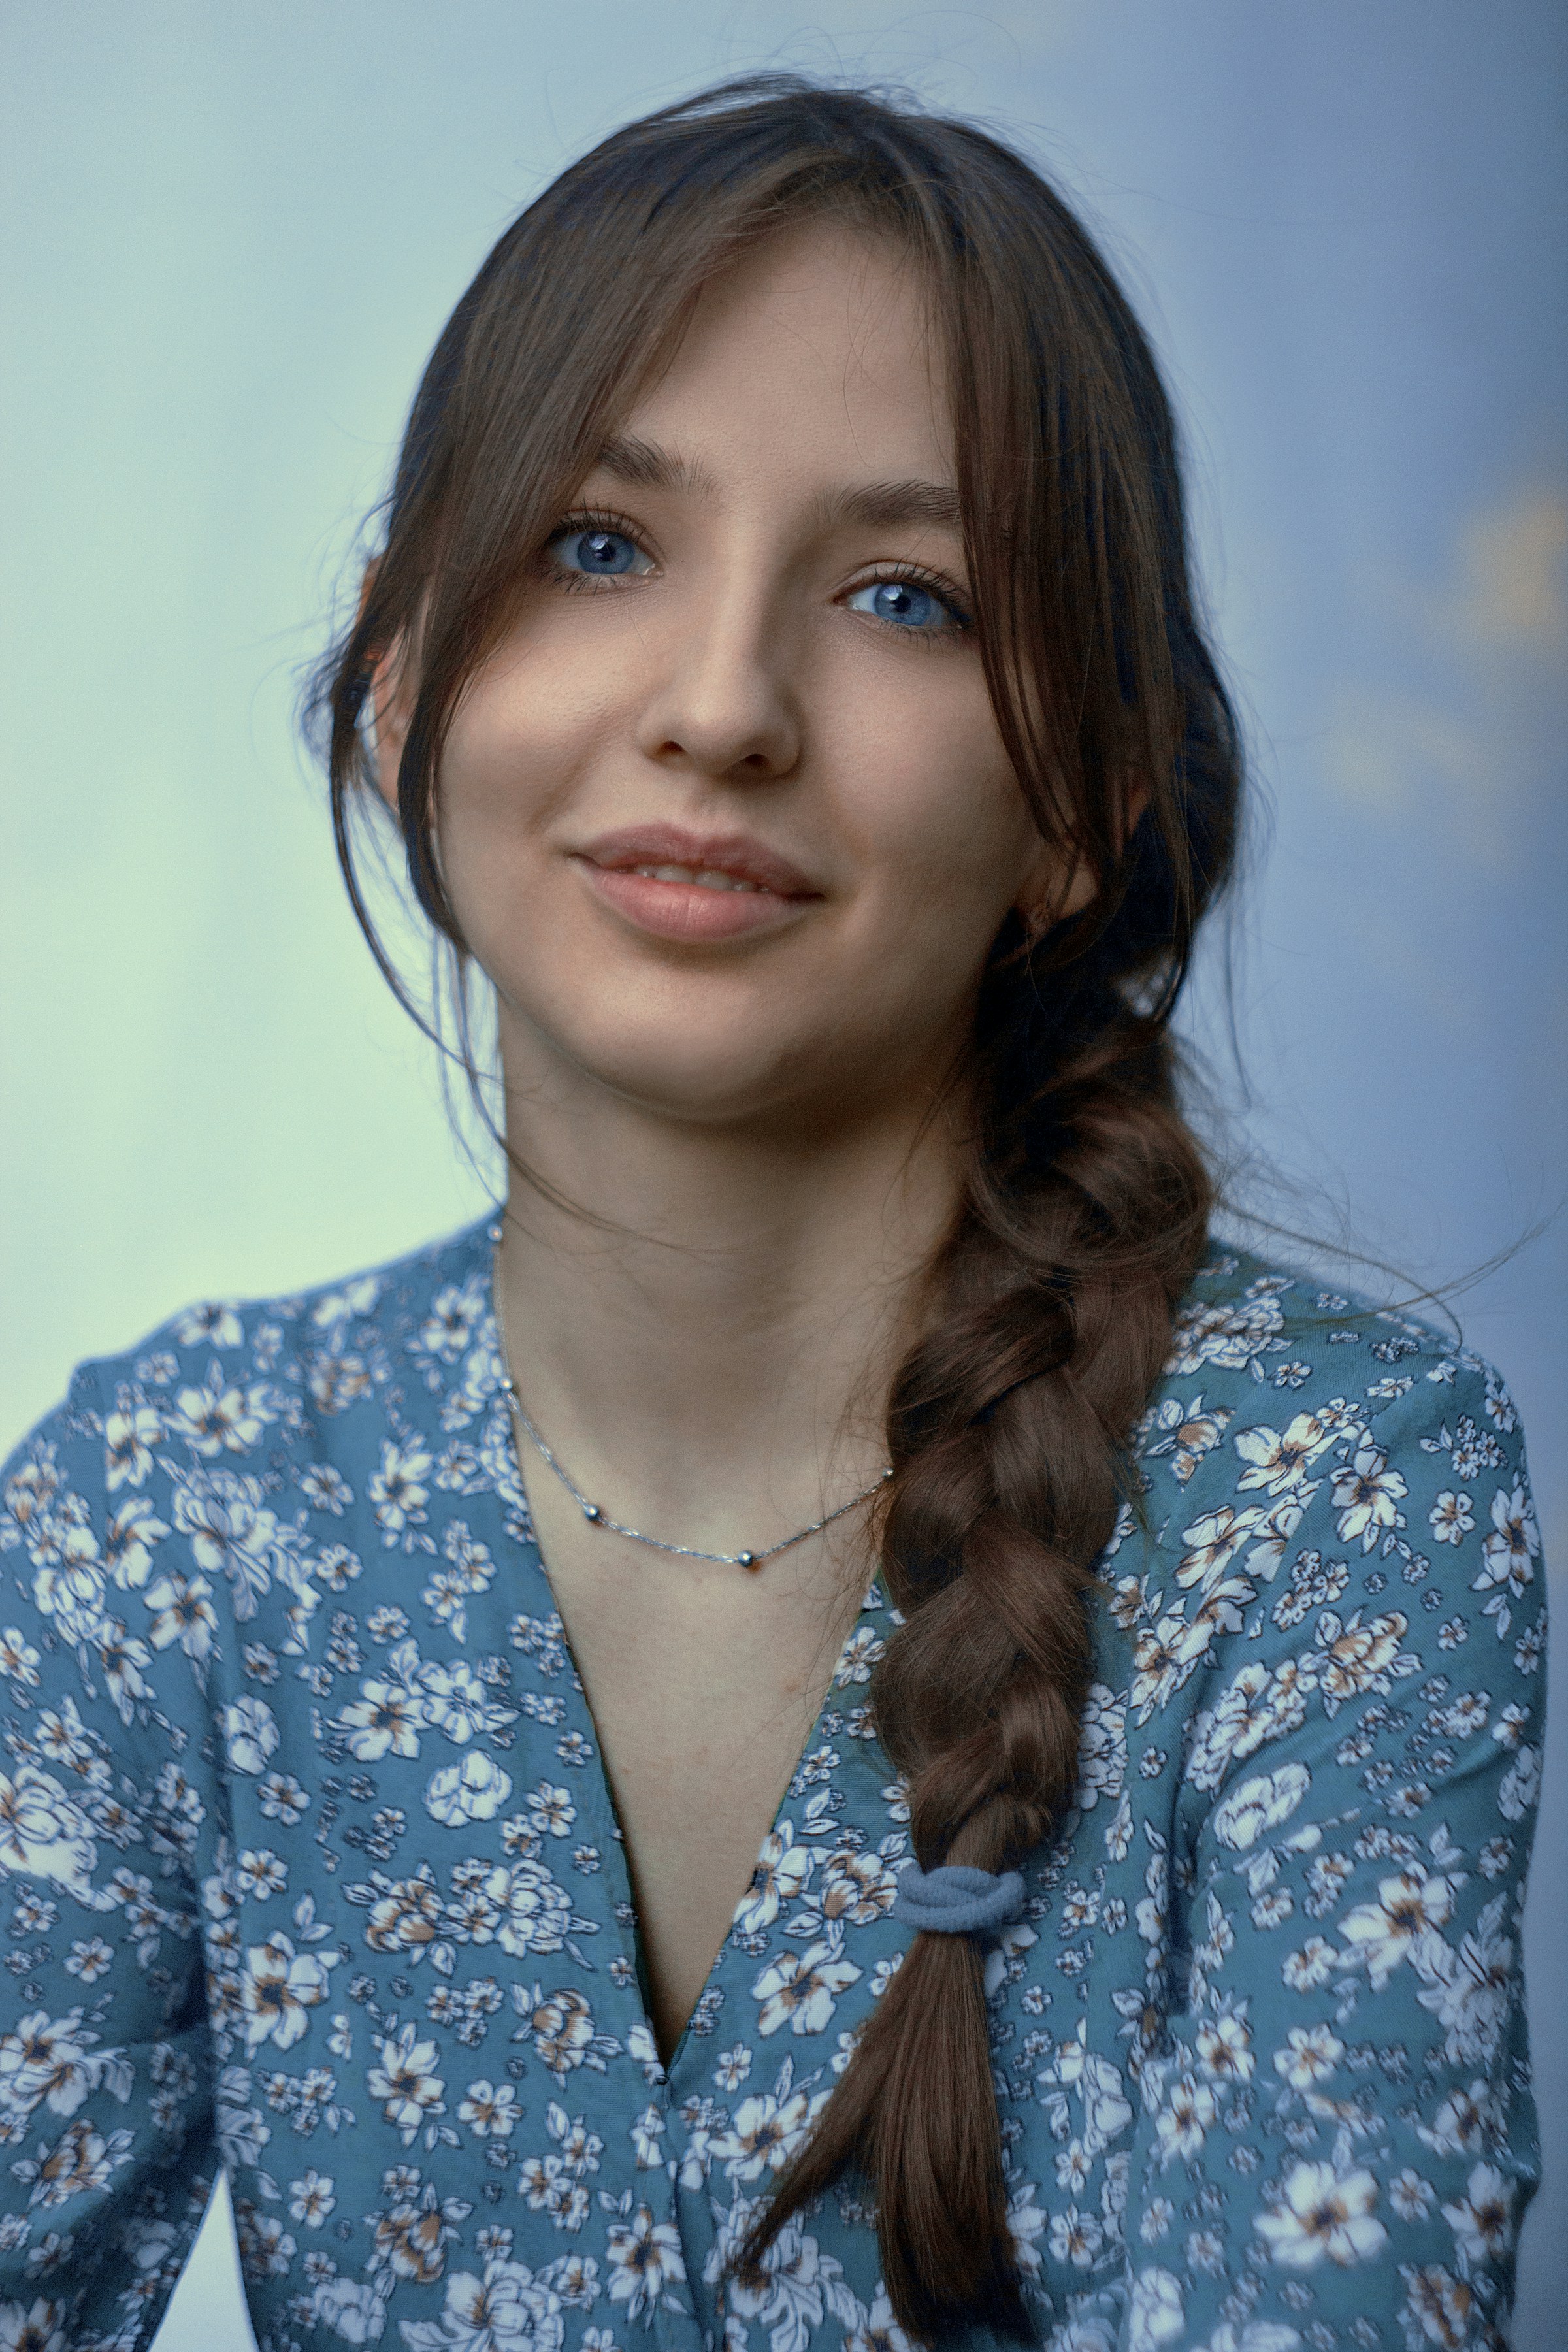 A young woman in a blue and white floral button-up shirt | Source: Unsplash